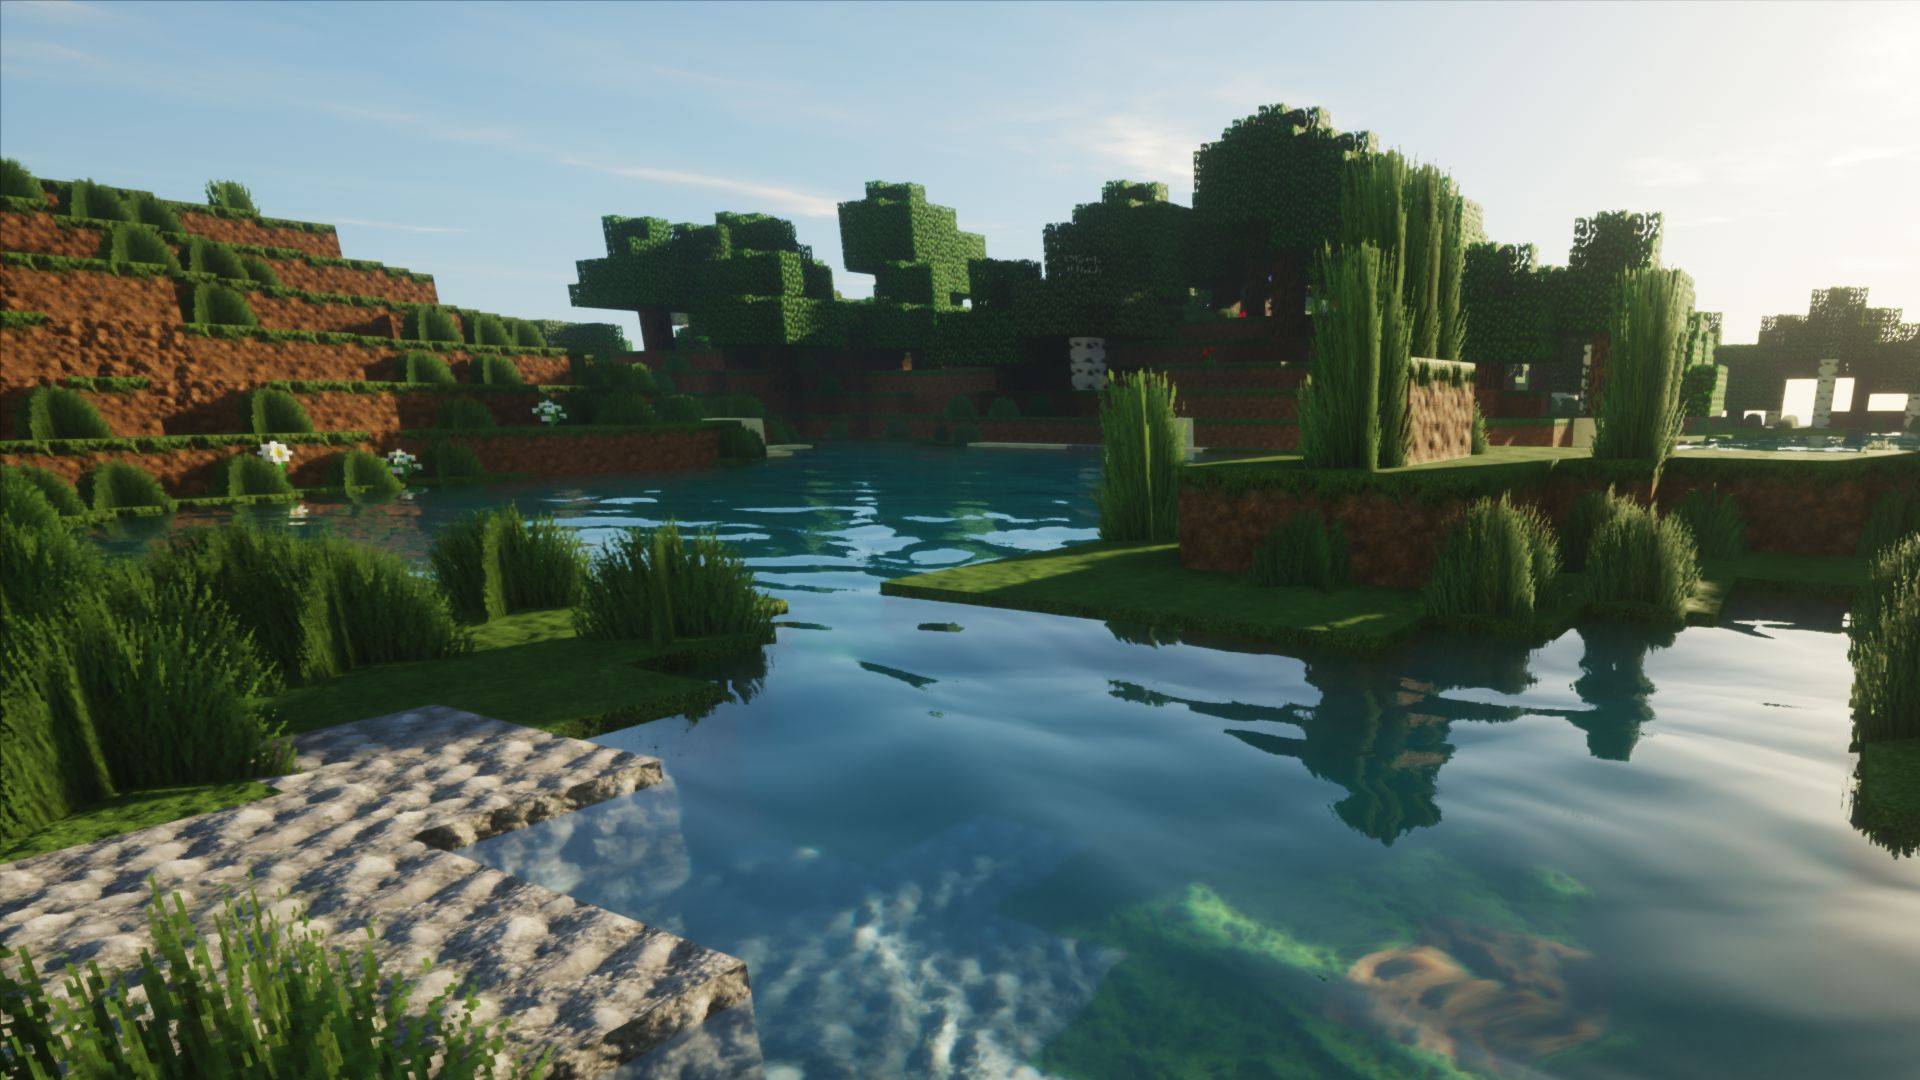 Minecraft ray tracing: how to get the SEUS shader